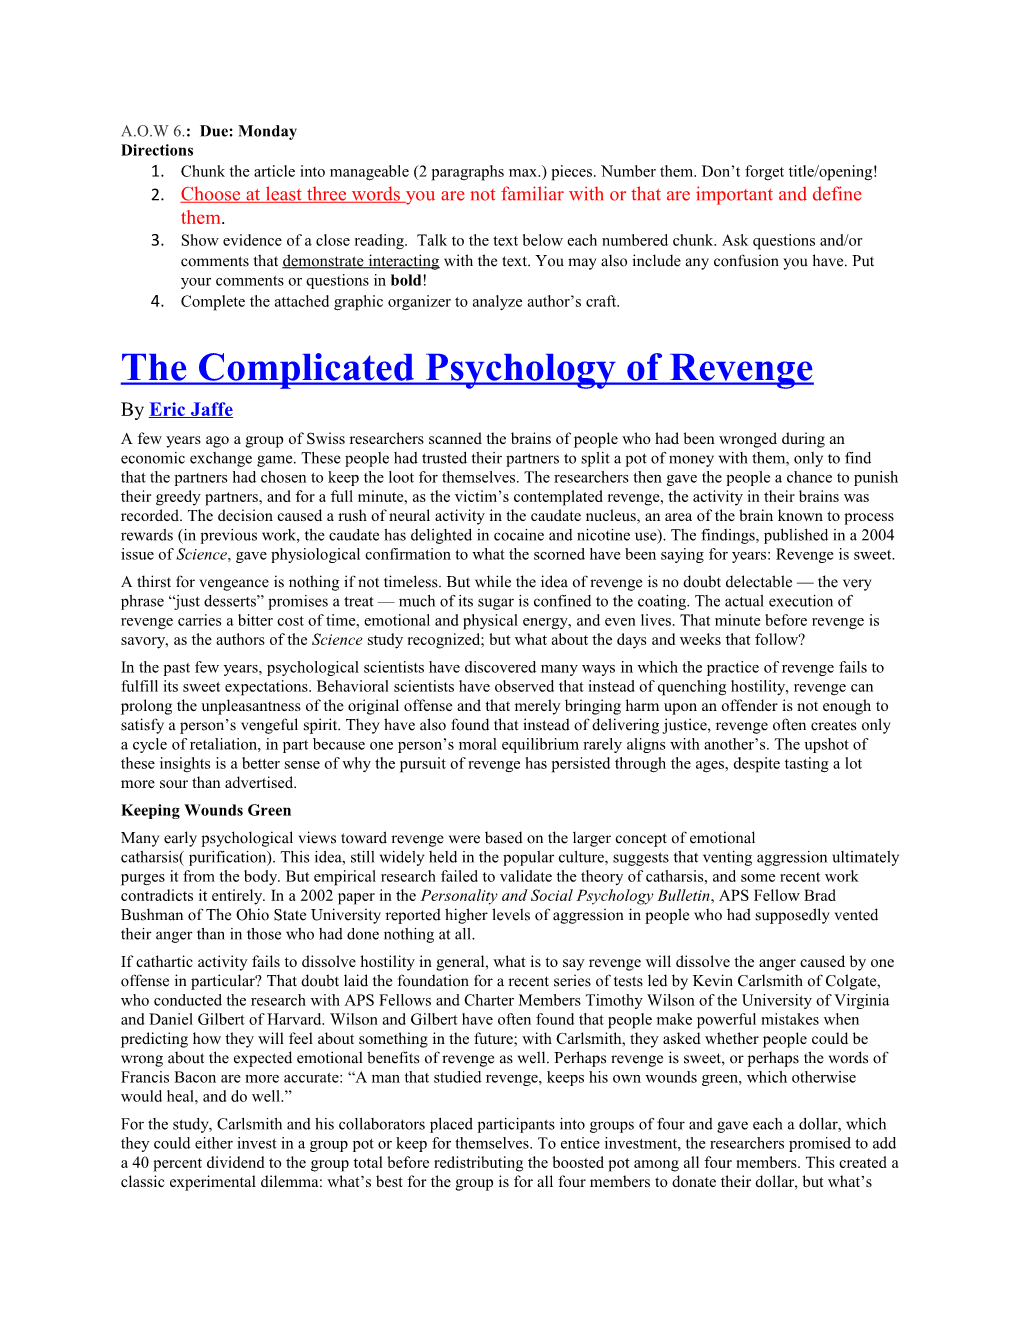 The Complicated Psychology of Revenge